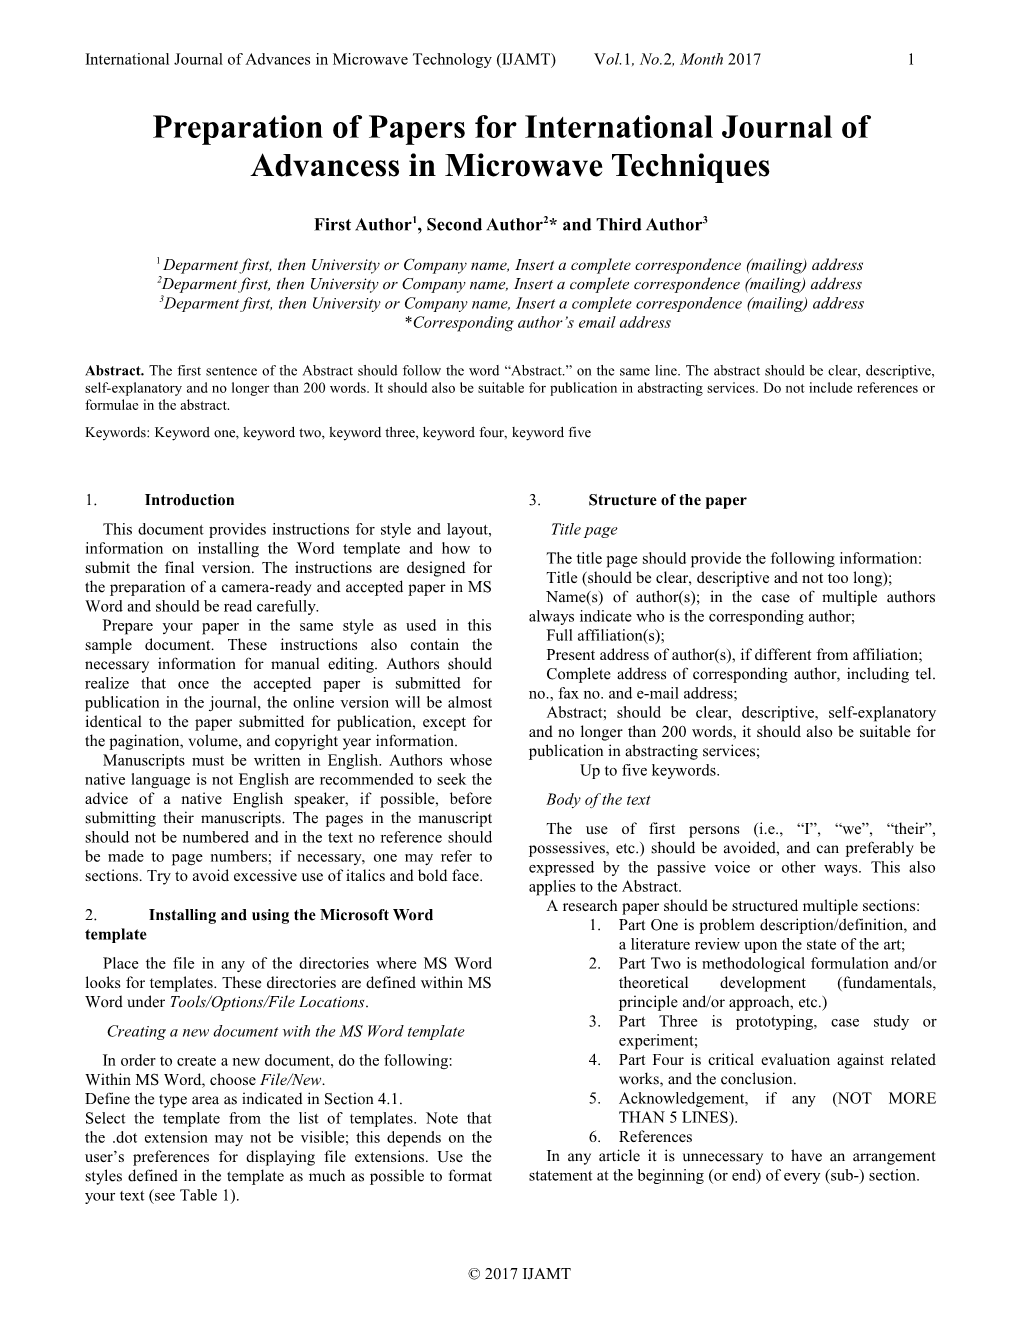 Preparation of Papers for International Journal of Advancess in Microwave Techniques